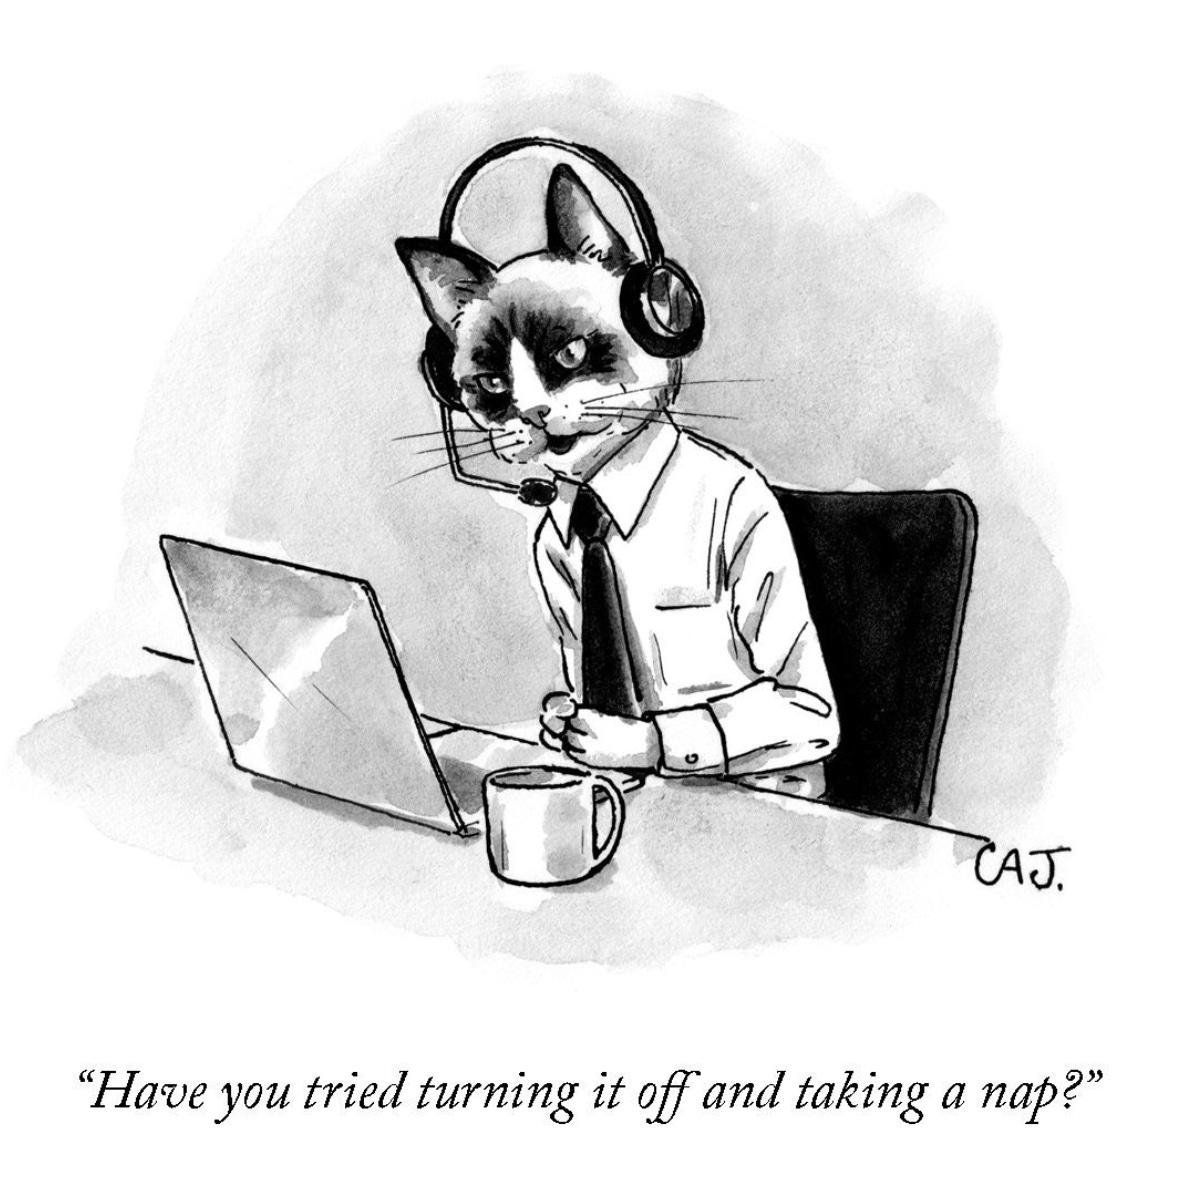 Comic of cat wearing headset saying "Did you try turning it off and taking a nap?"